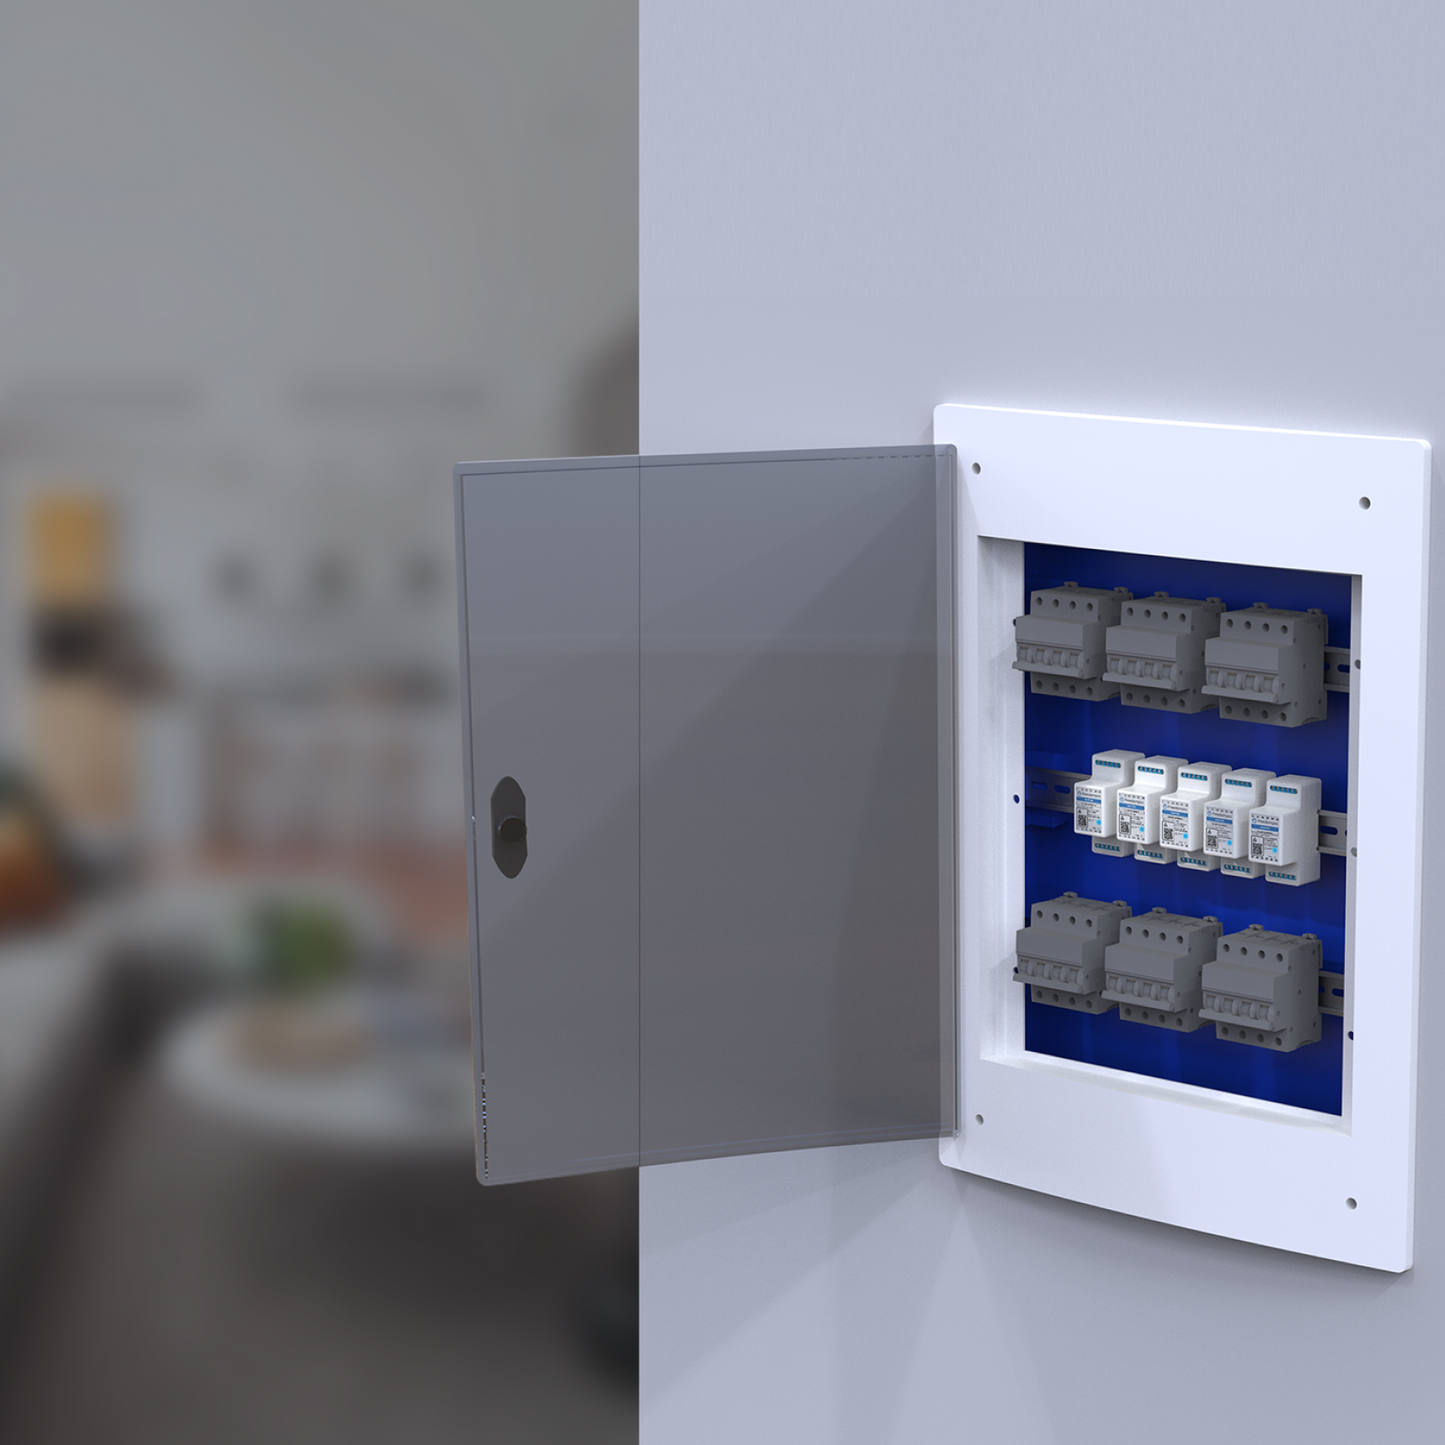 WiFi operating Smart Module to control 2 electrical shutters or blinds. Installation in the electrical panel.